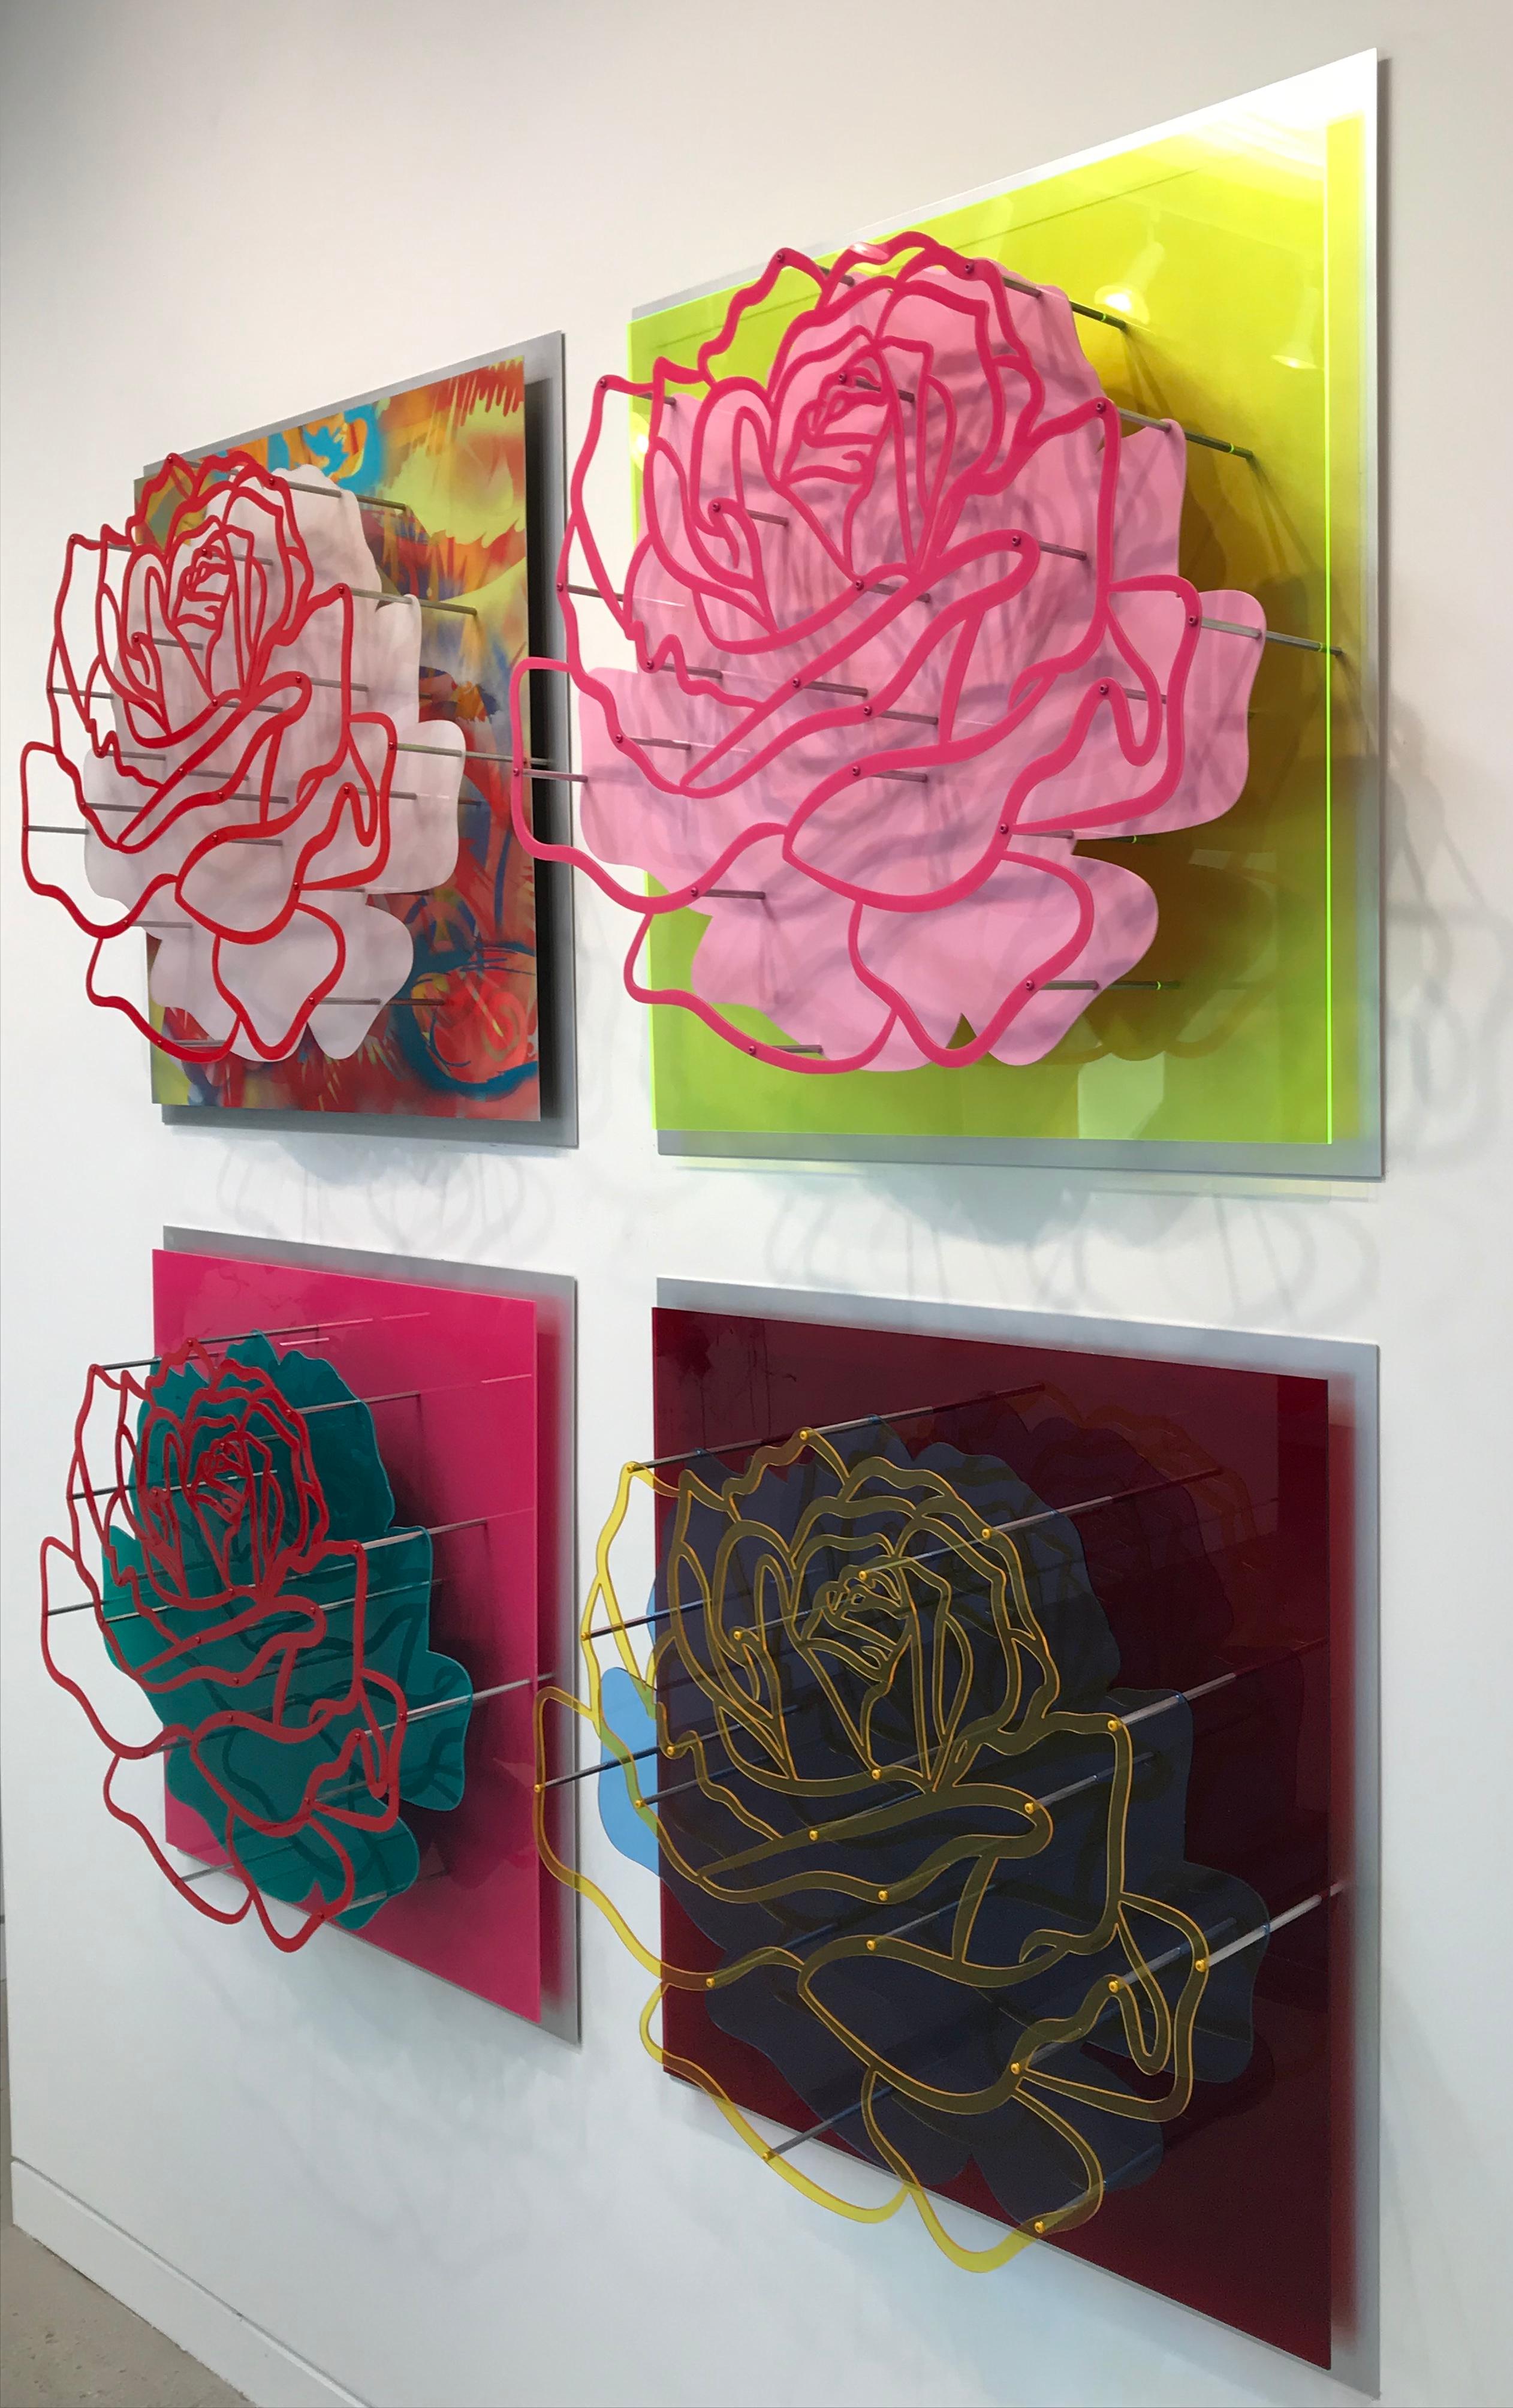 Michael Kalish Abstract Painting - Four Acrylic "Glass" Roses